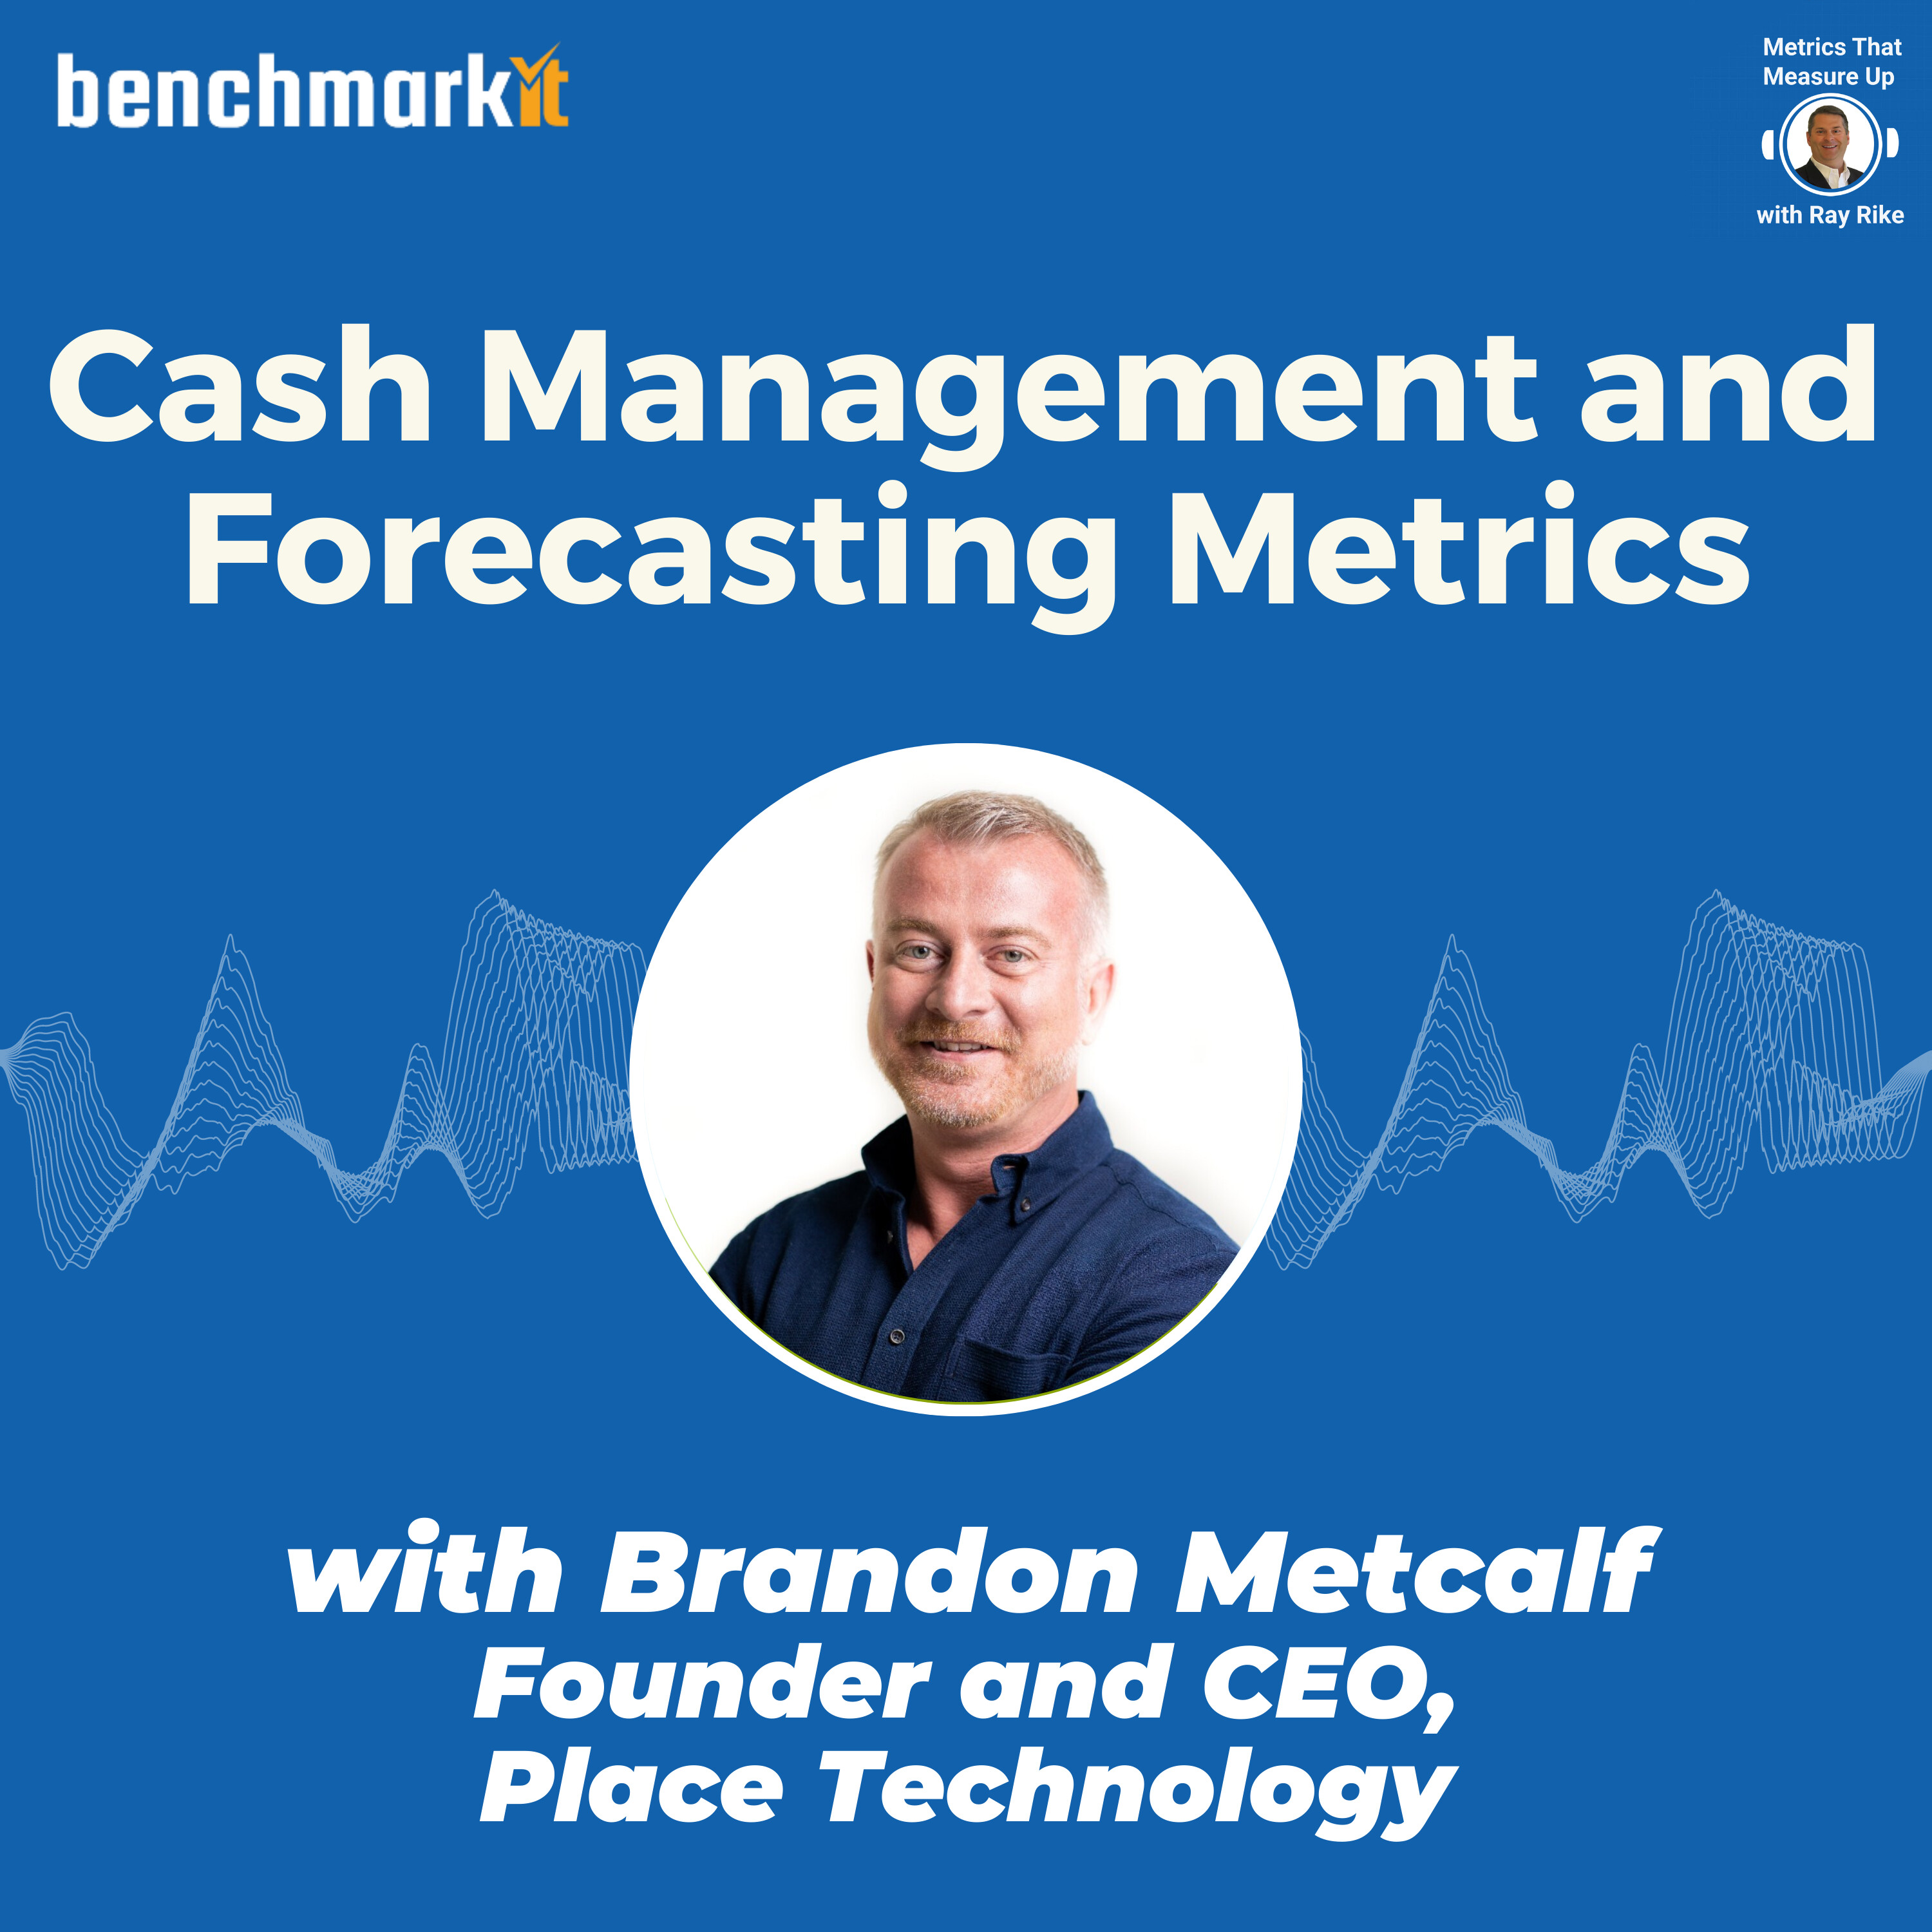 B2B SaaS Cash Management and Metrics - with Brandon Metcalf, Founder and CEO Place Technology